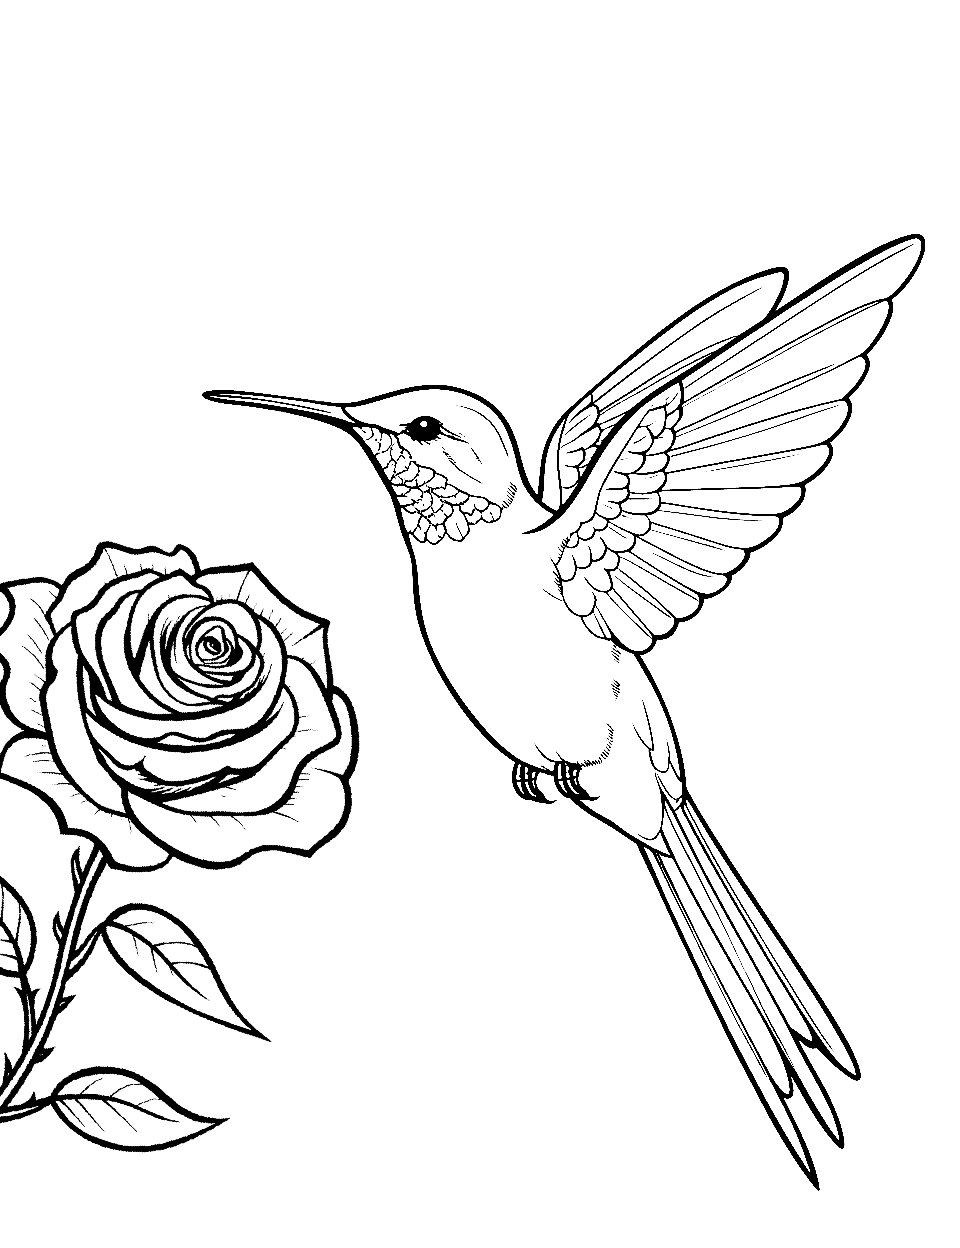 Flower and Hummingbird Coloring Page - A hummingbird delicately hovering by a blooming flower.